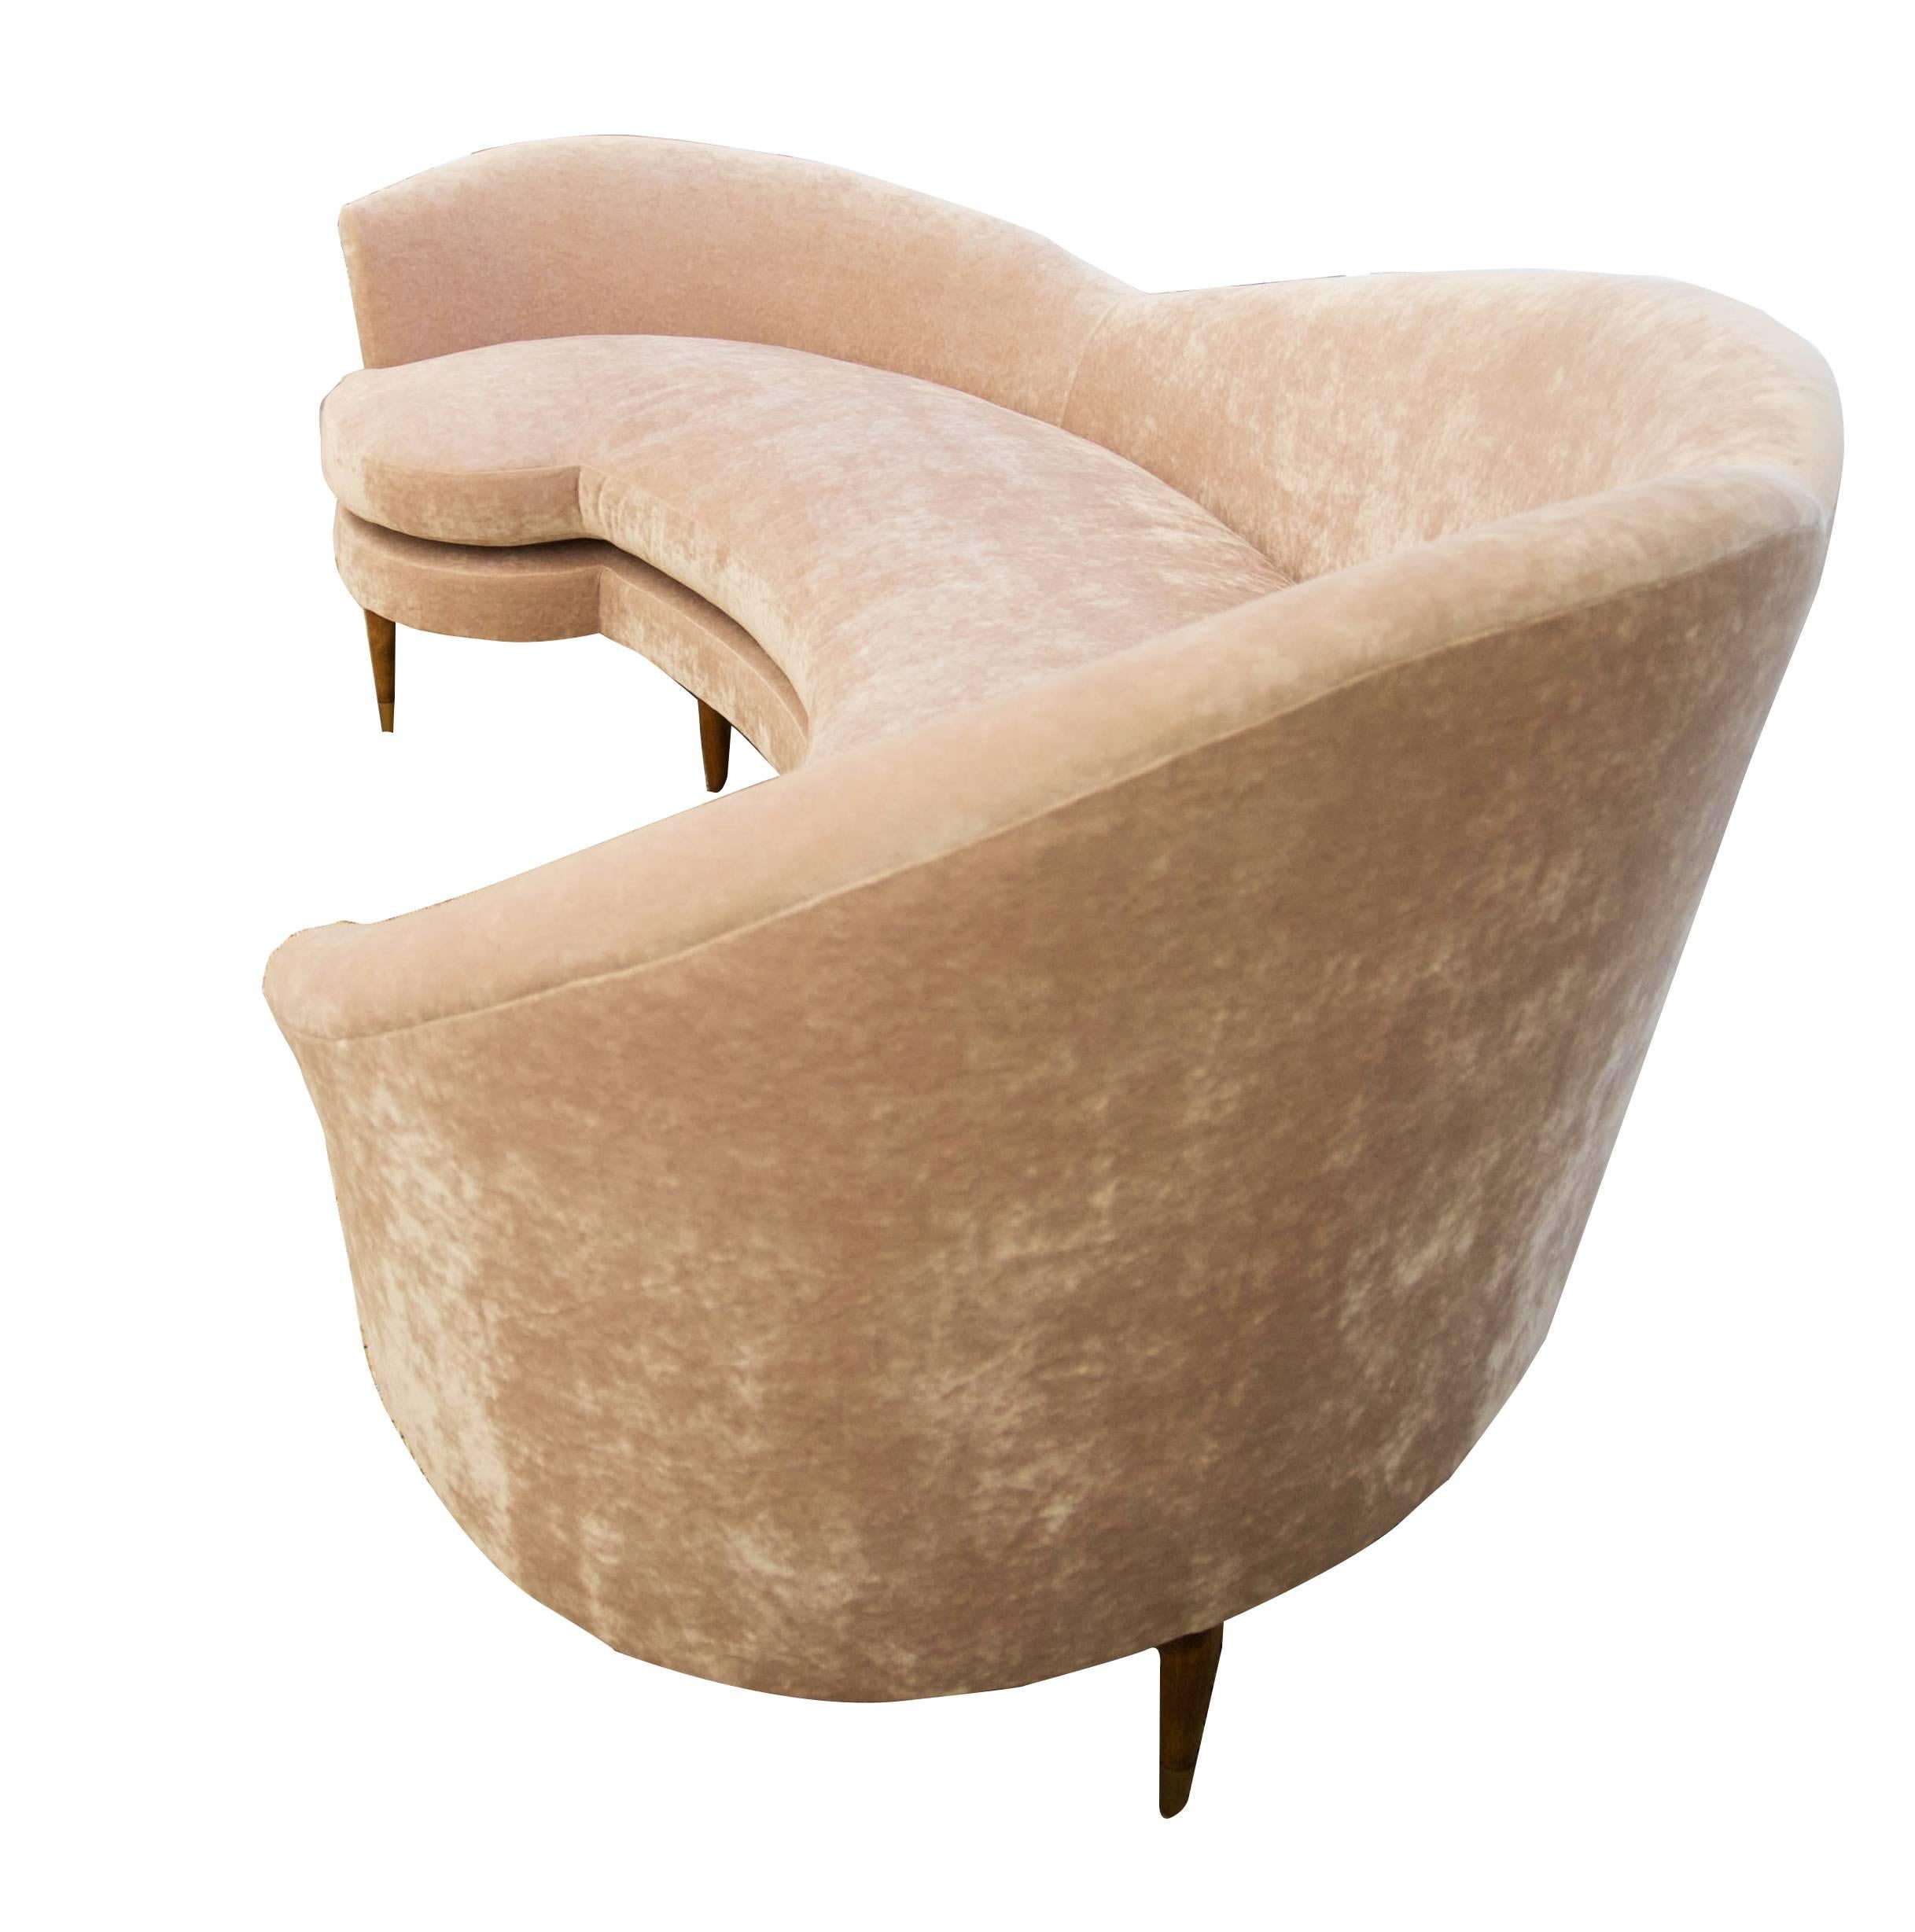 Large curved sofa inspired by Italian mid-century design. Upholstered in blush pink crushed velvet. Velvet is napless. Single cushion with foam, dacron, and down. Tight back that is also soft and accommodating for lounging. Art Deco peg legs with